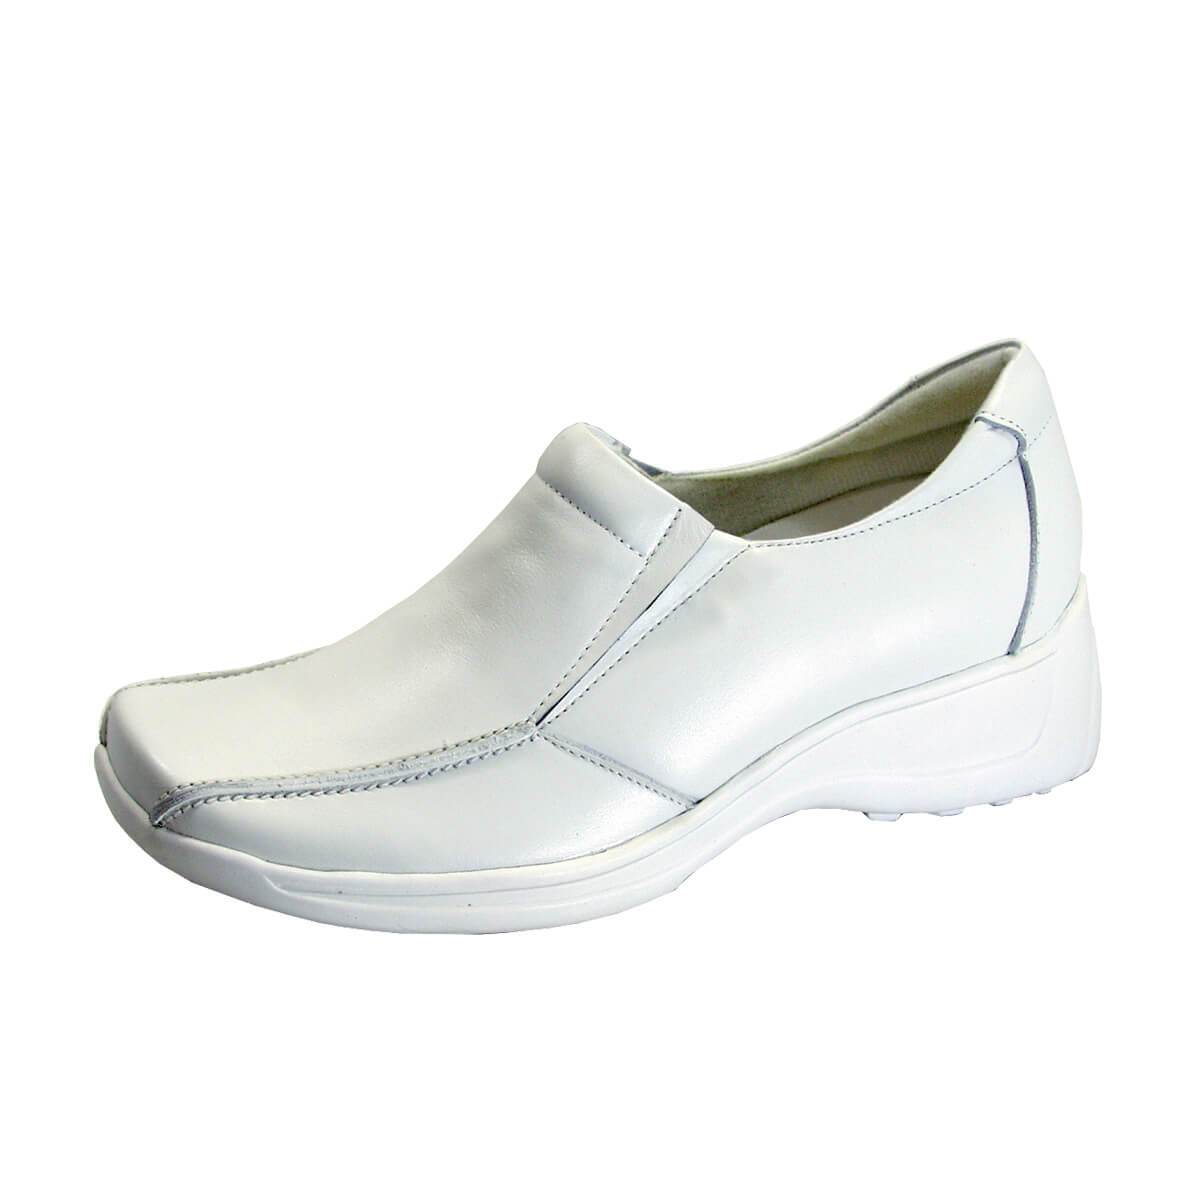 24 HOUR COMFORT Malia Women's Wide Width Leather Slip-On Shoes